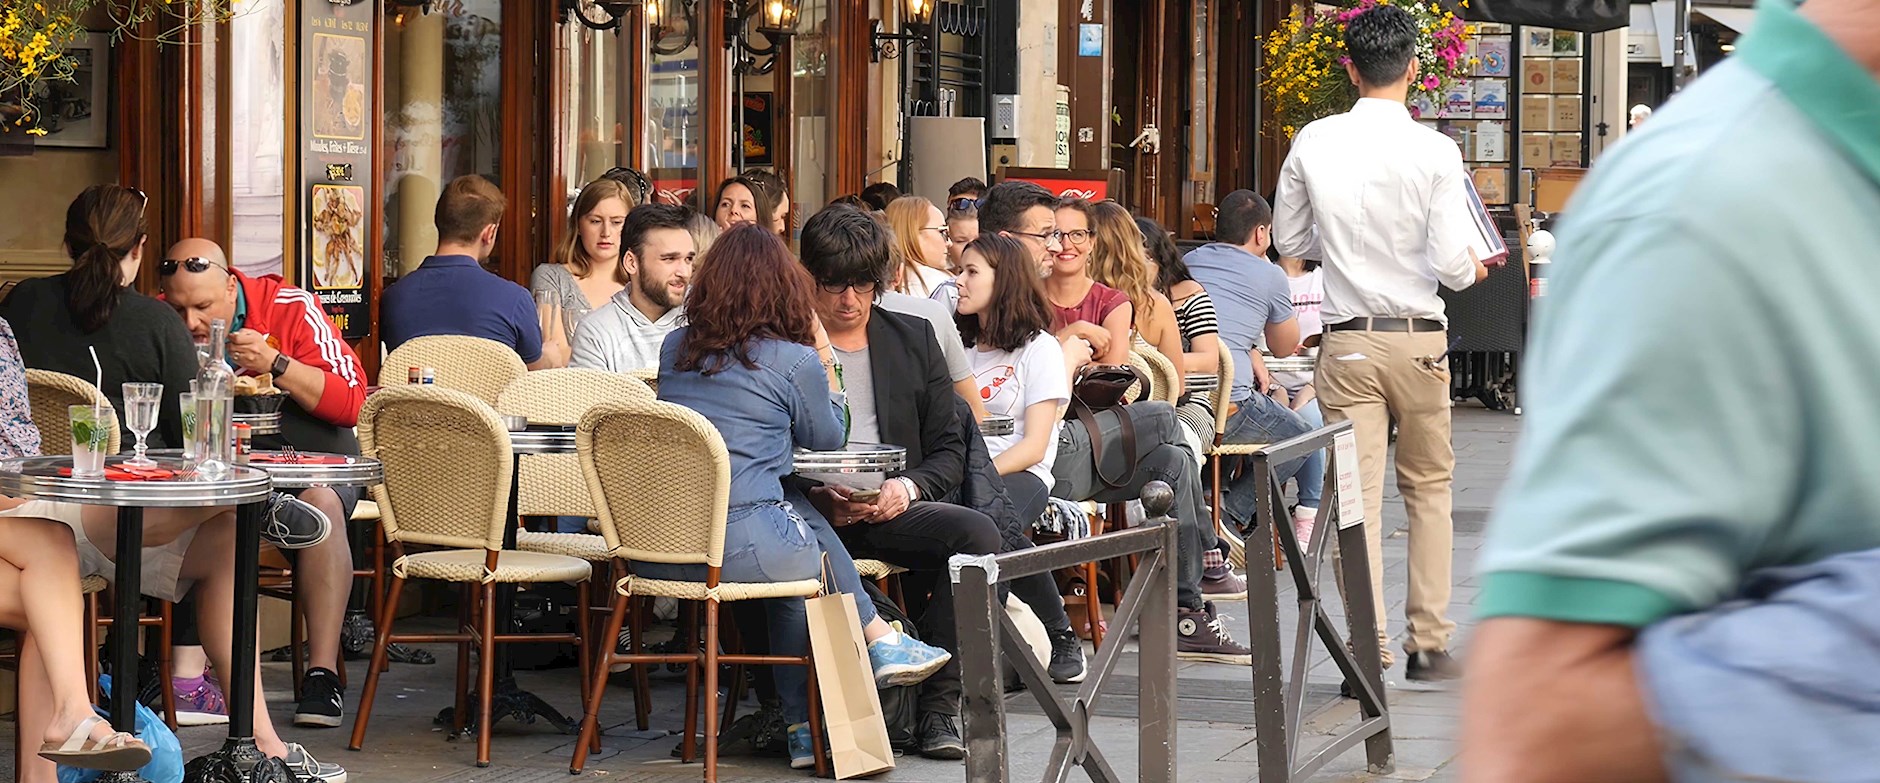 People dining at an outdoor restaurant